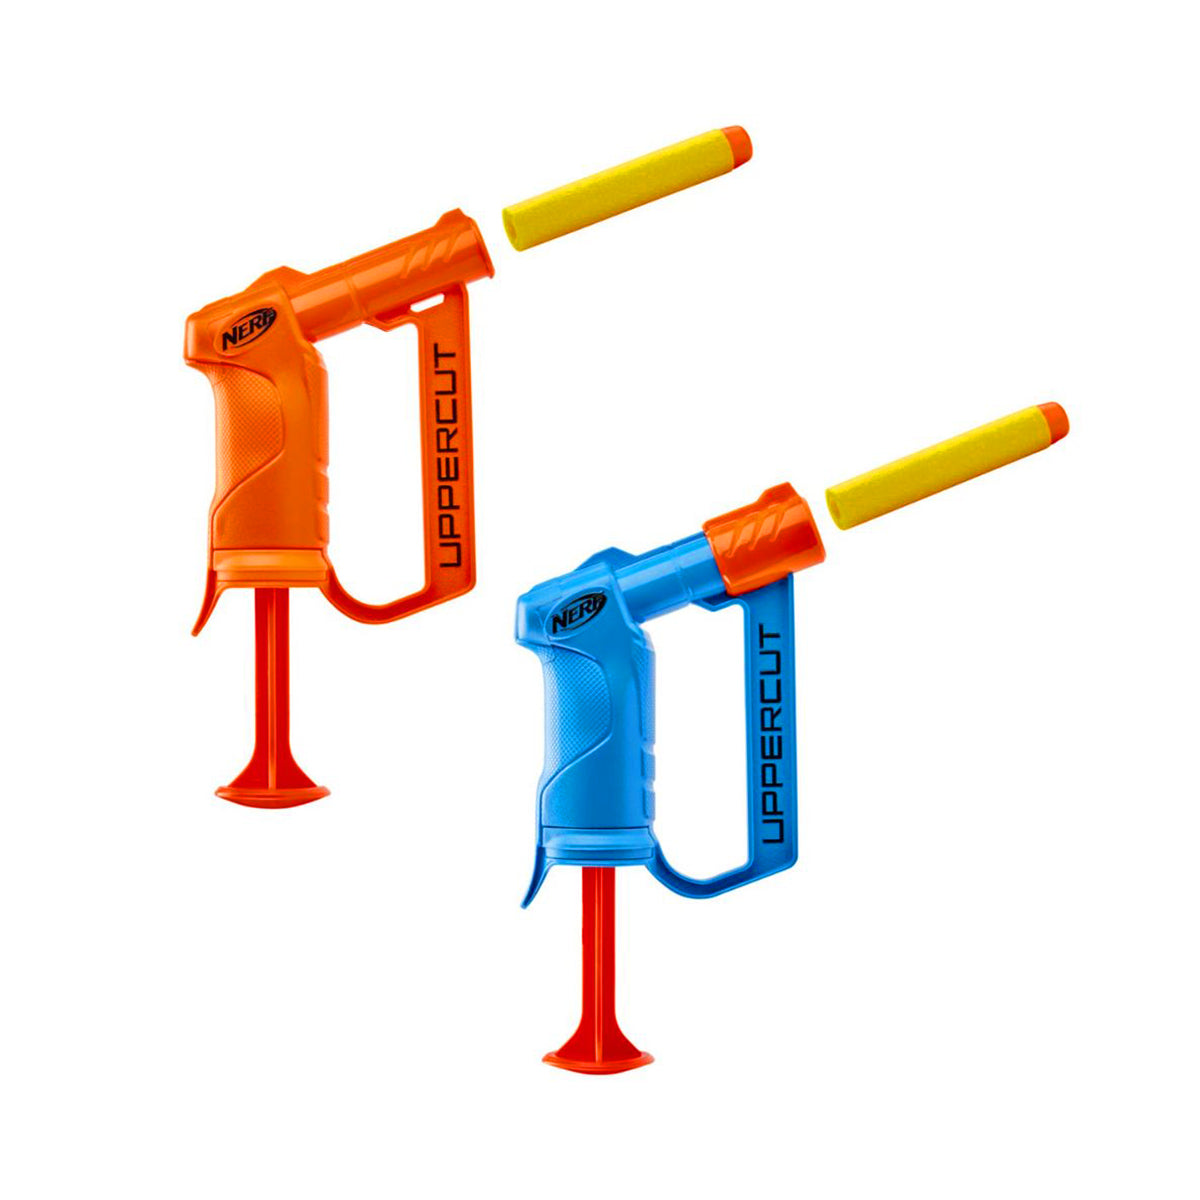 Nerf - Alpha Strike Uppercut Blasters (Colors Vary - One Supplied)